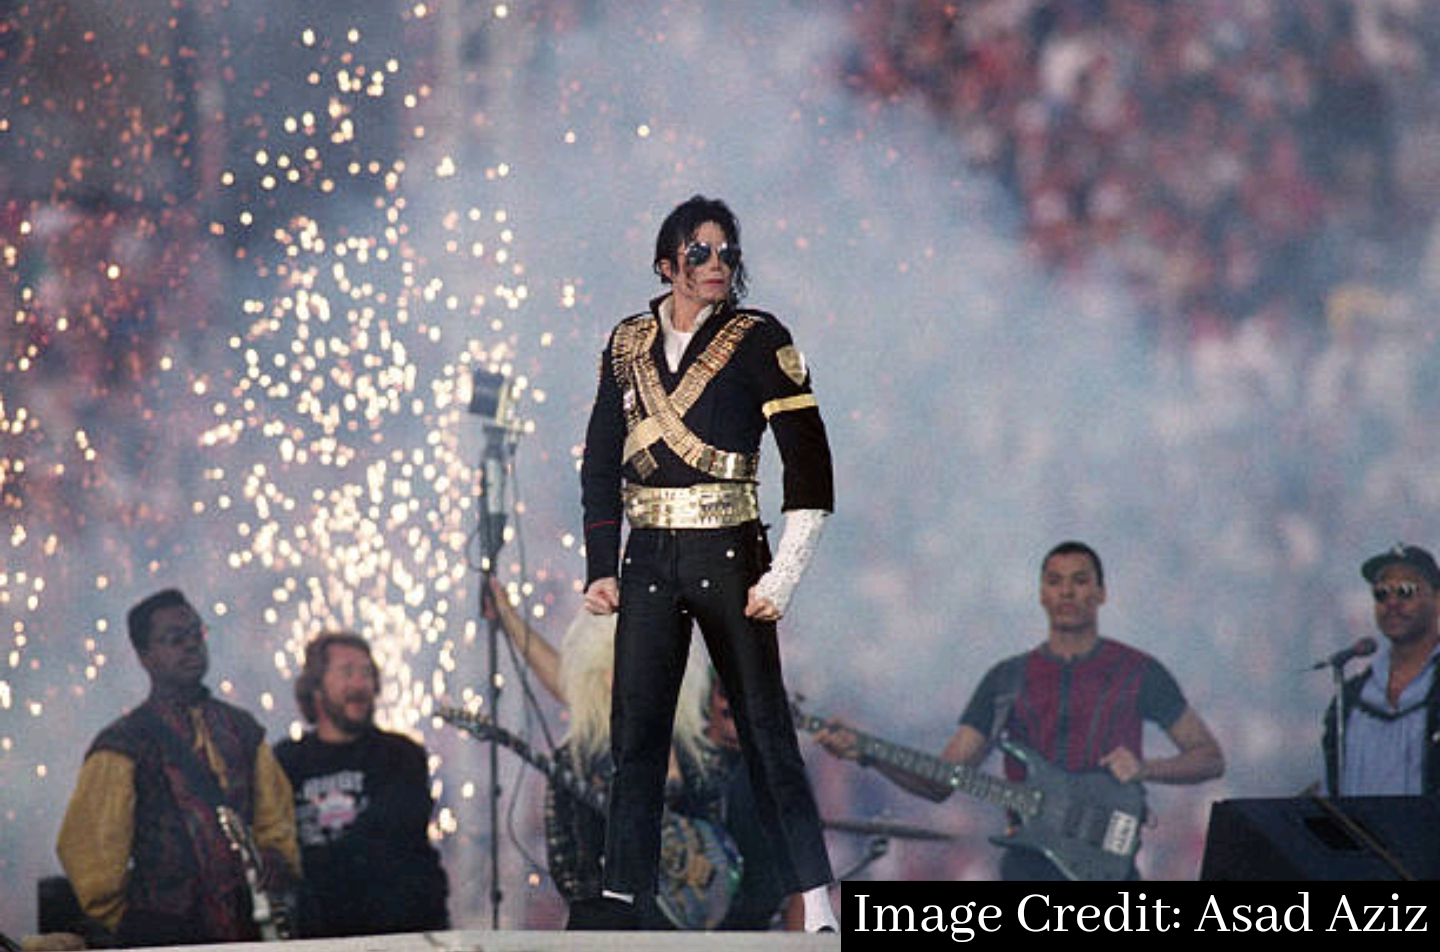 Michael jackson during stage performance photo